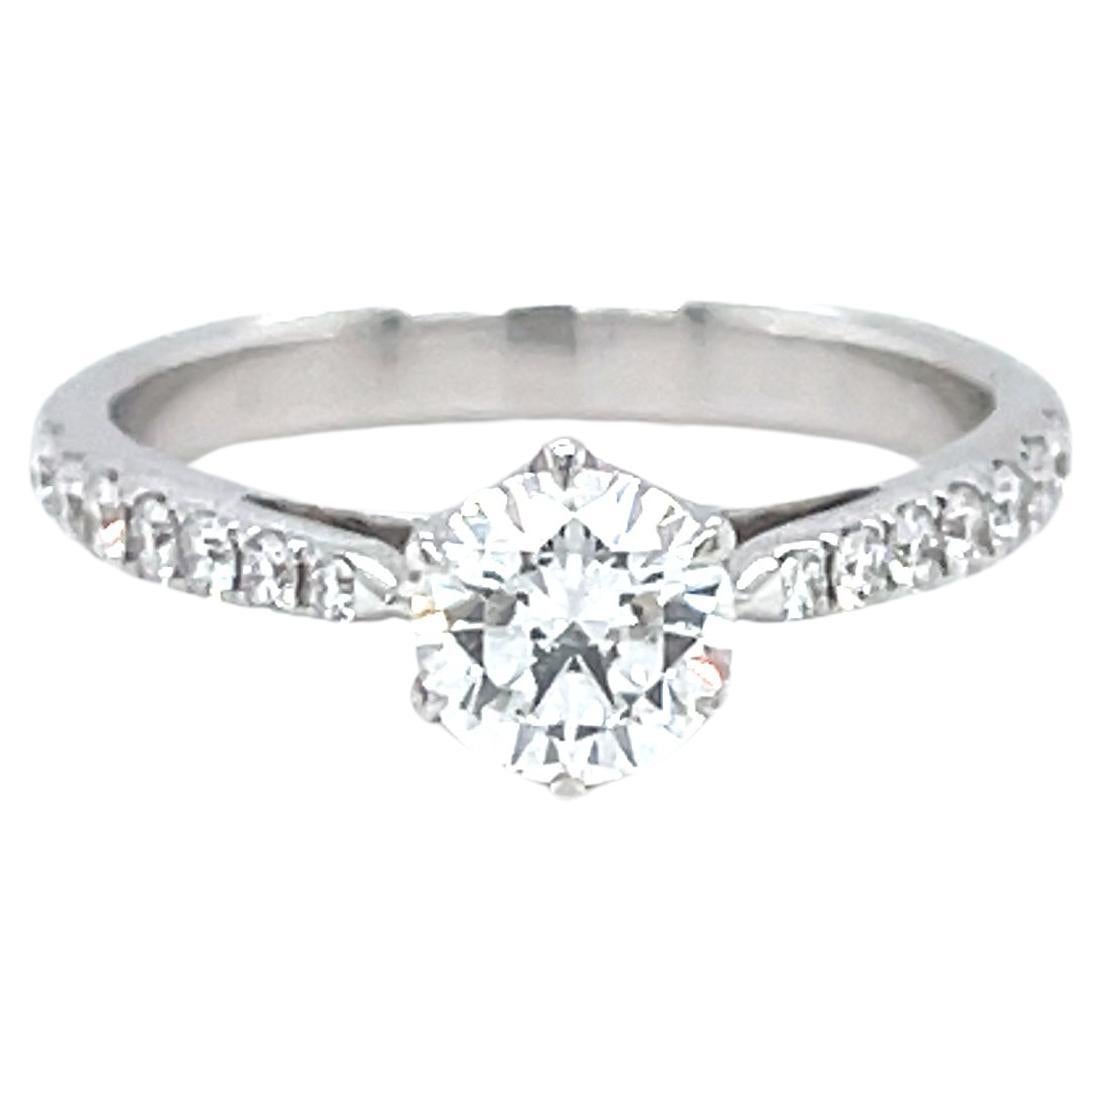 GIA Certified Round 0.72 Carat E VVS2 Diamond Solitaire Ring in 18K White Gold For Sale